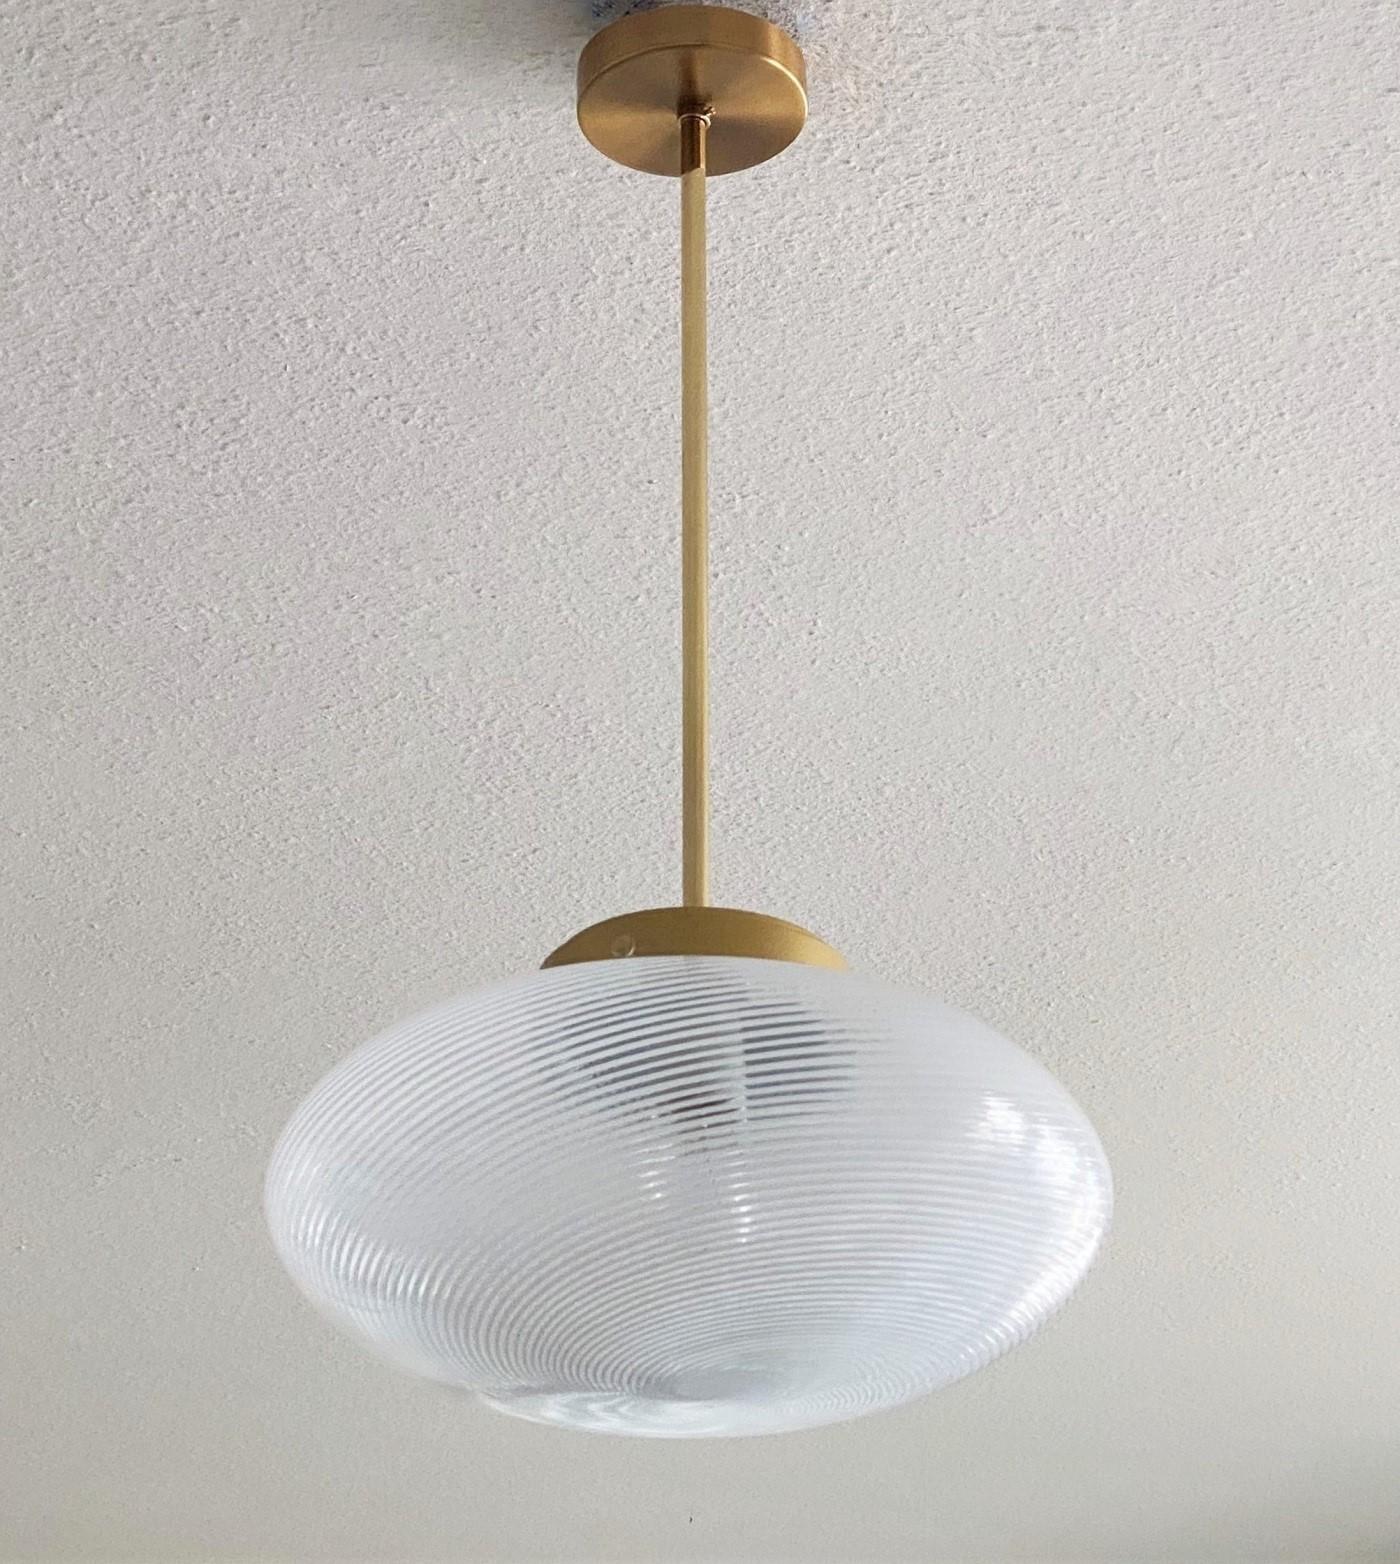 A pair of Venini hand blown Murano glass pendants by Ludovico Diaz de Santillana for Venini, Series -Tessuto, Italy, circa 1970's. Brass and parcel gold enameled metal mounted.
Each pendant takes one E27 large sized bulb up to 100Watt. Both pendants